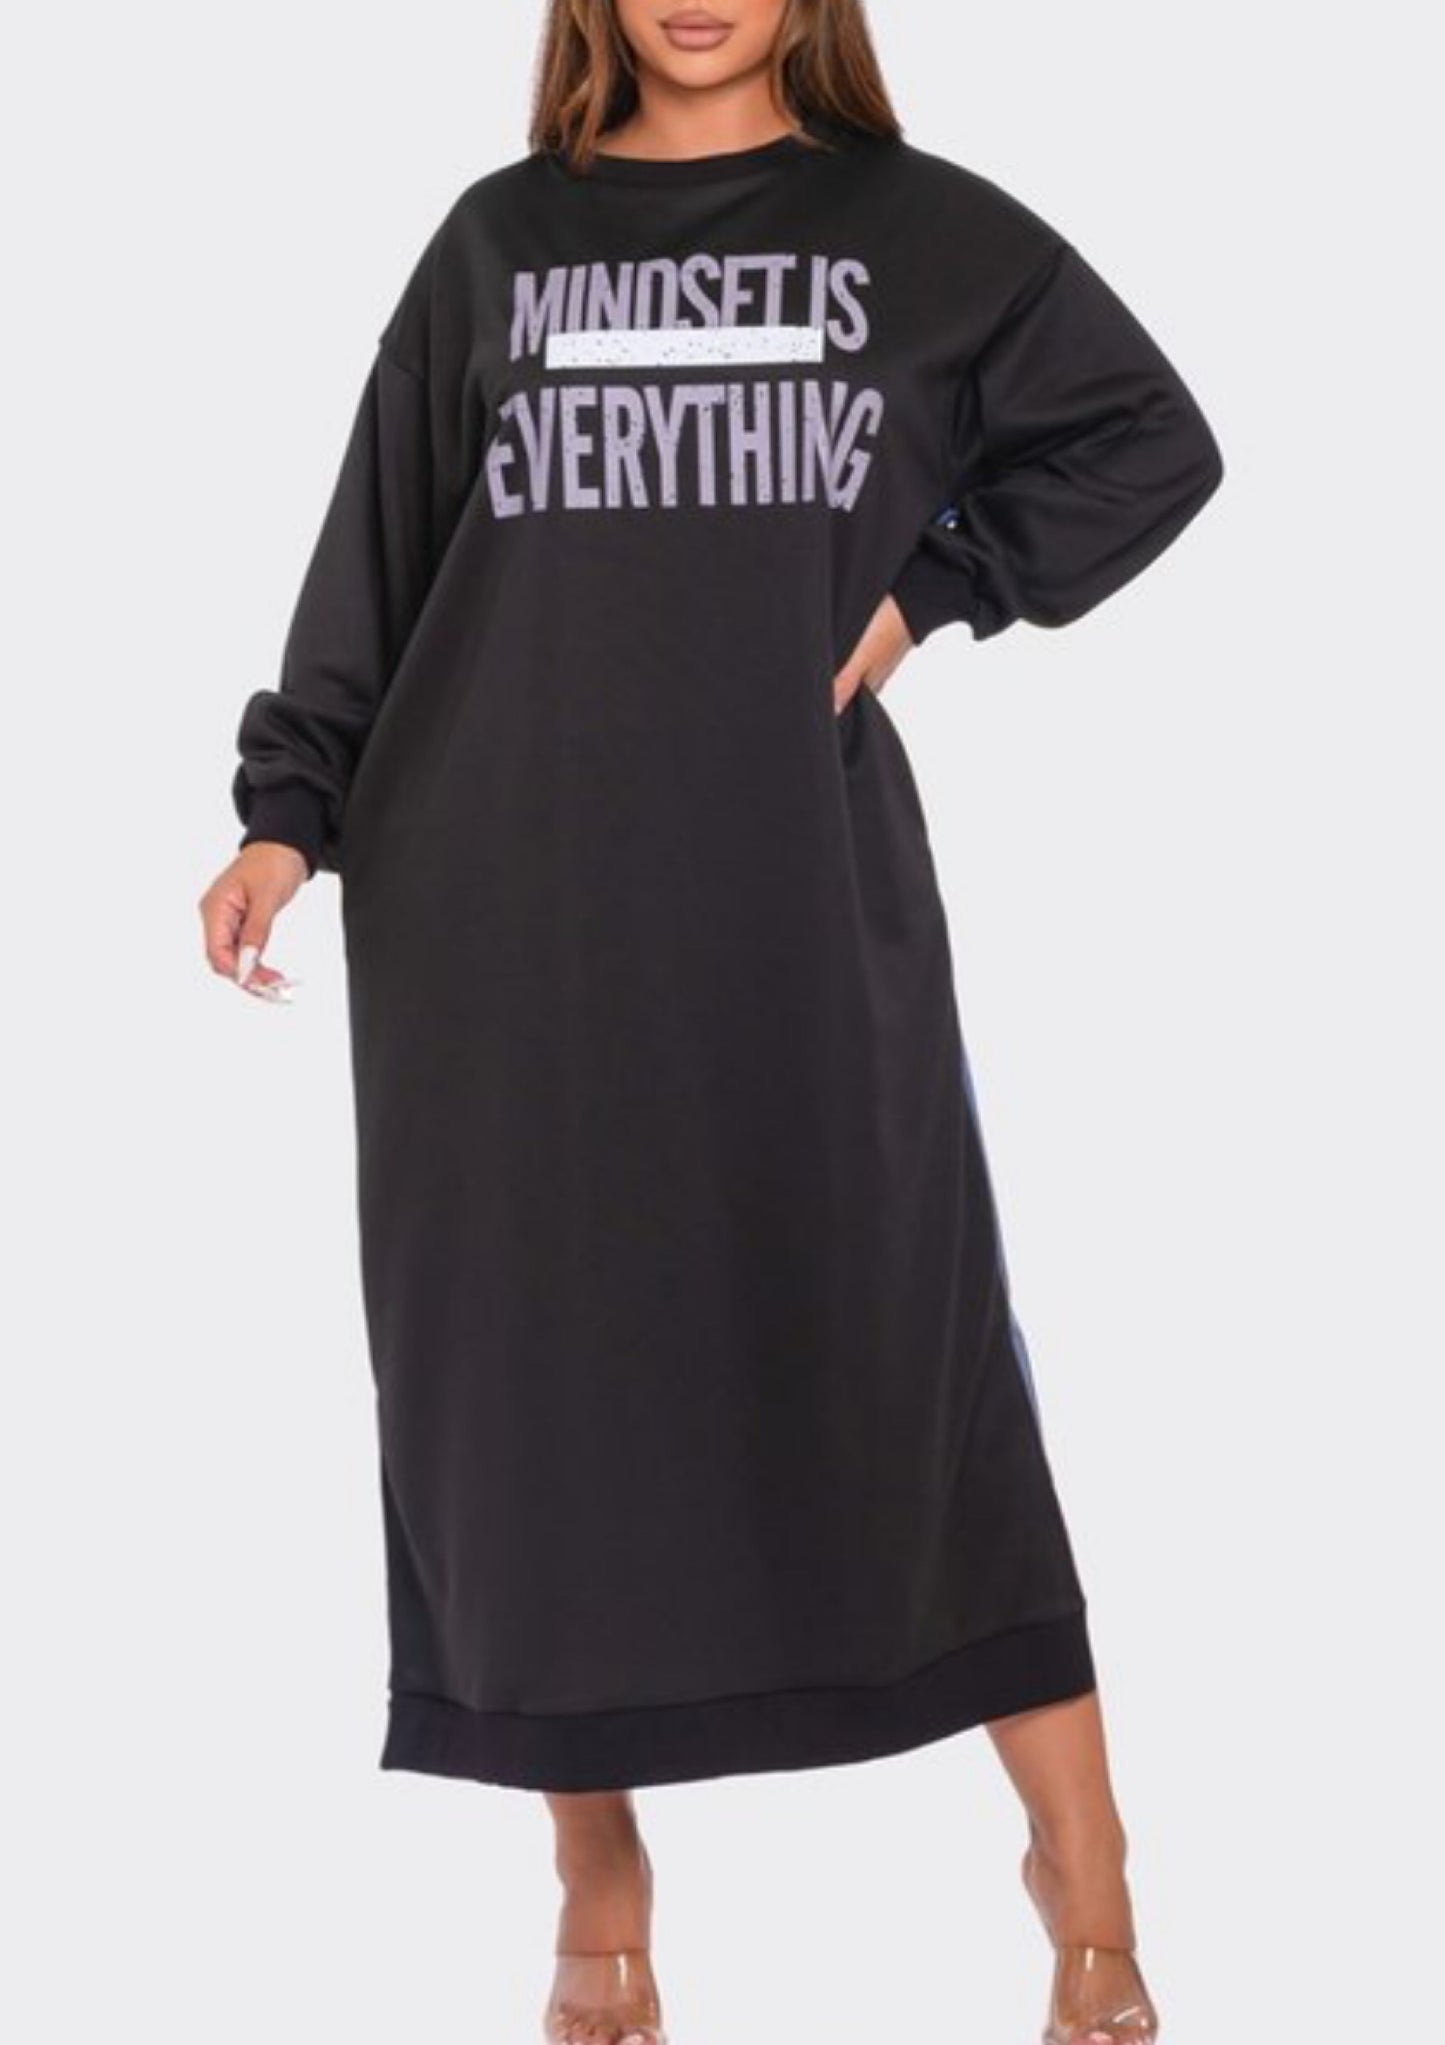 MindSet is Everything Denim Mix Dress ( More colors)